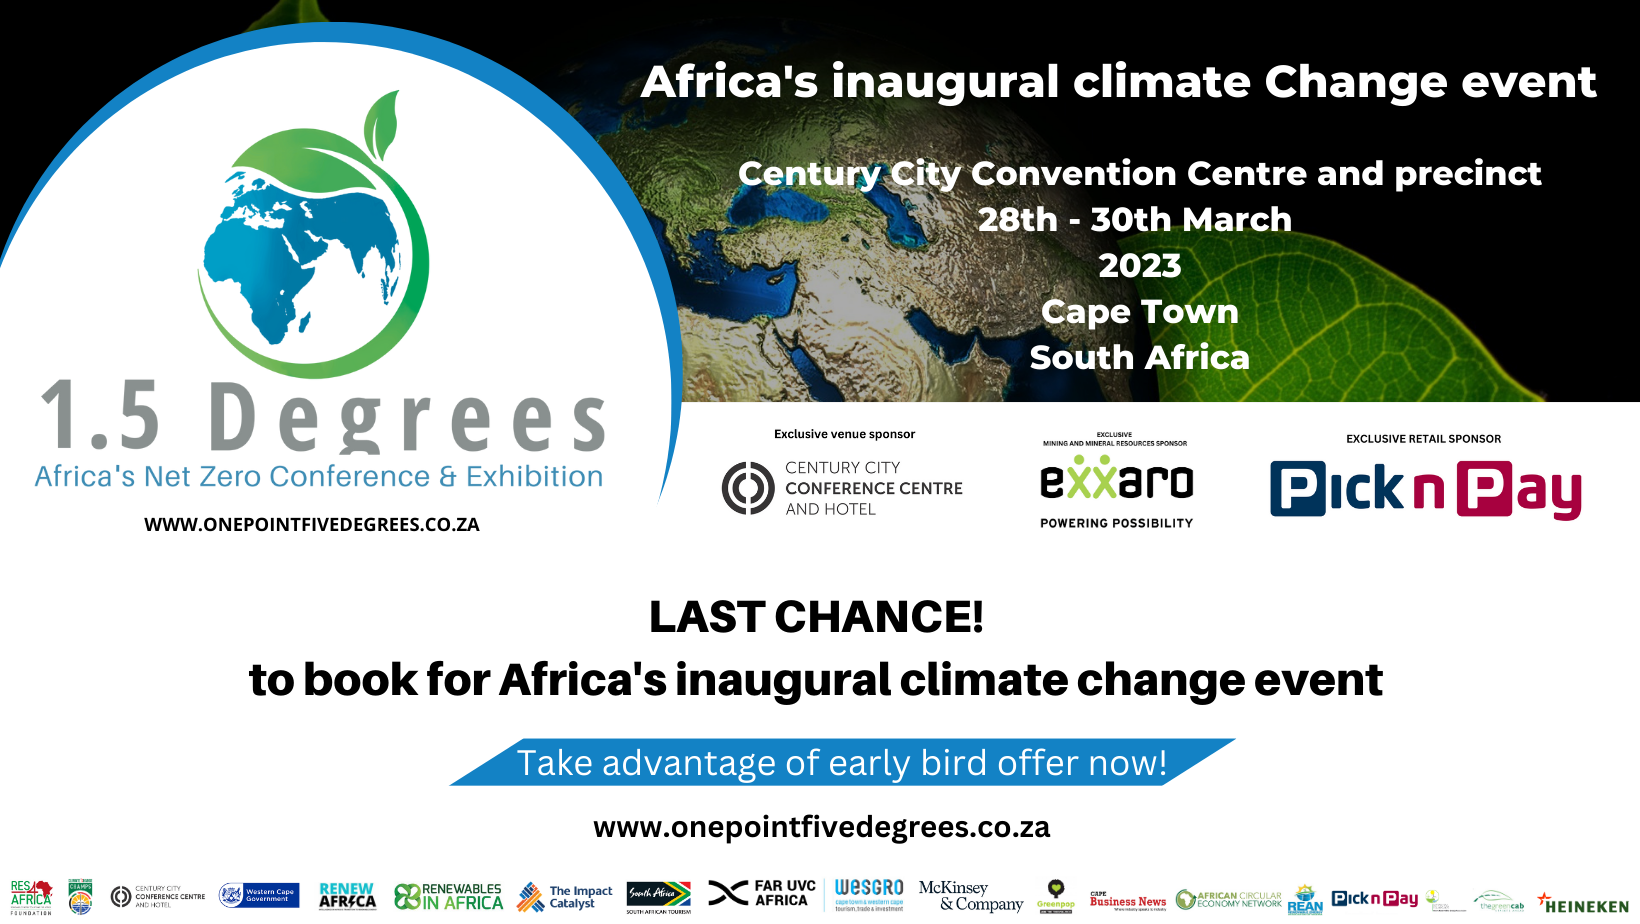 1.5 Degrees Africas net zero conference and exhibition